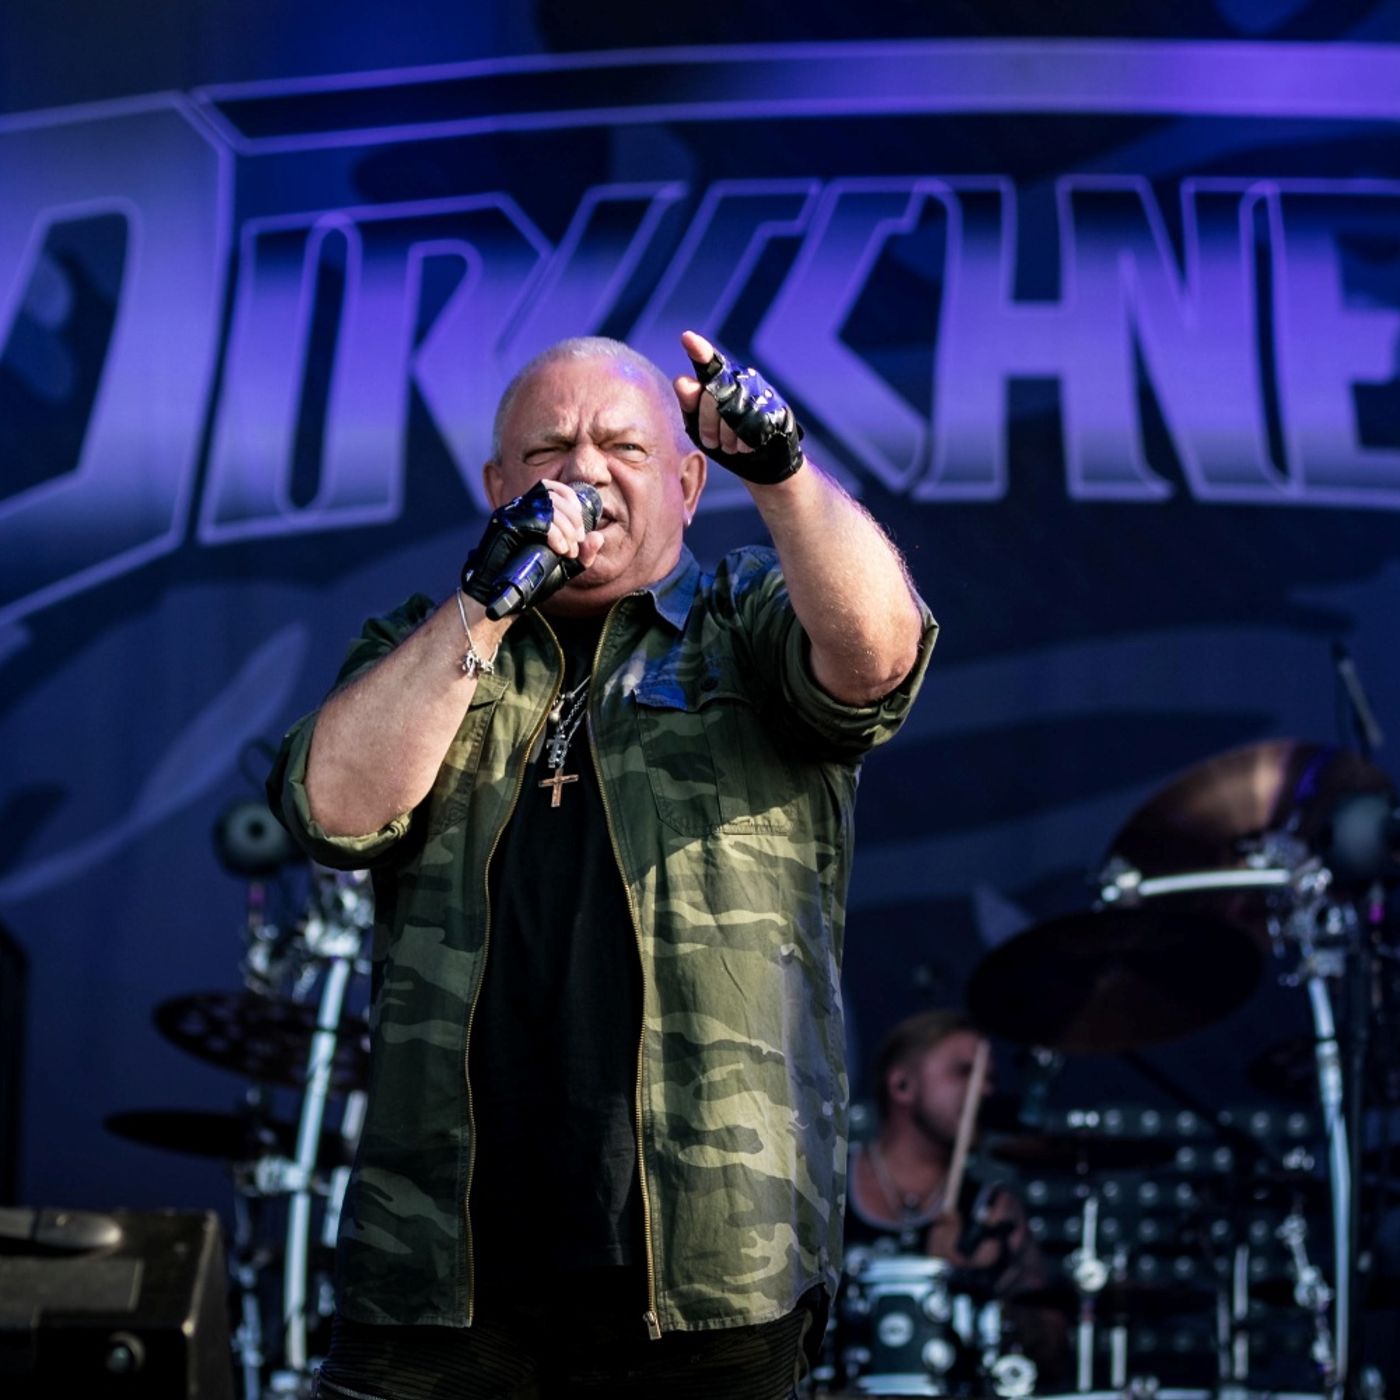 Creating History With UDO DIRKSCHNEIDER From ACCEPT